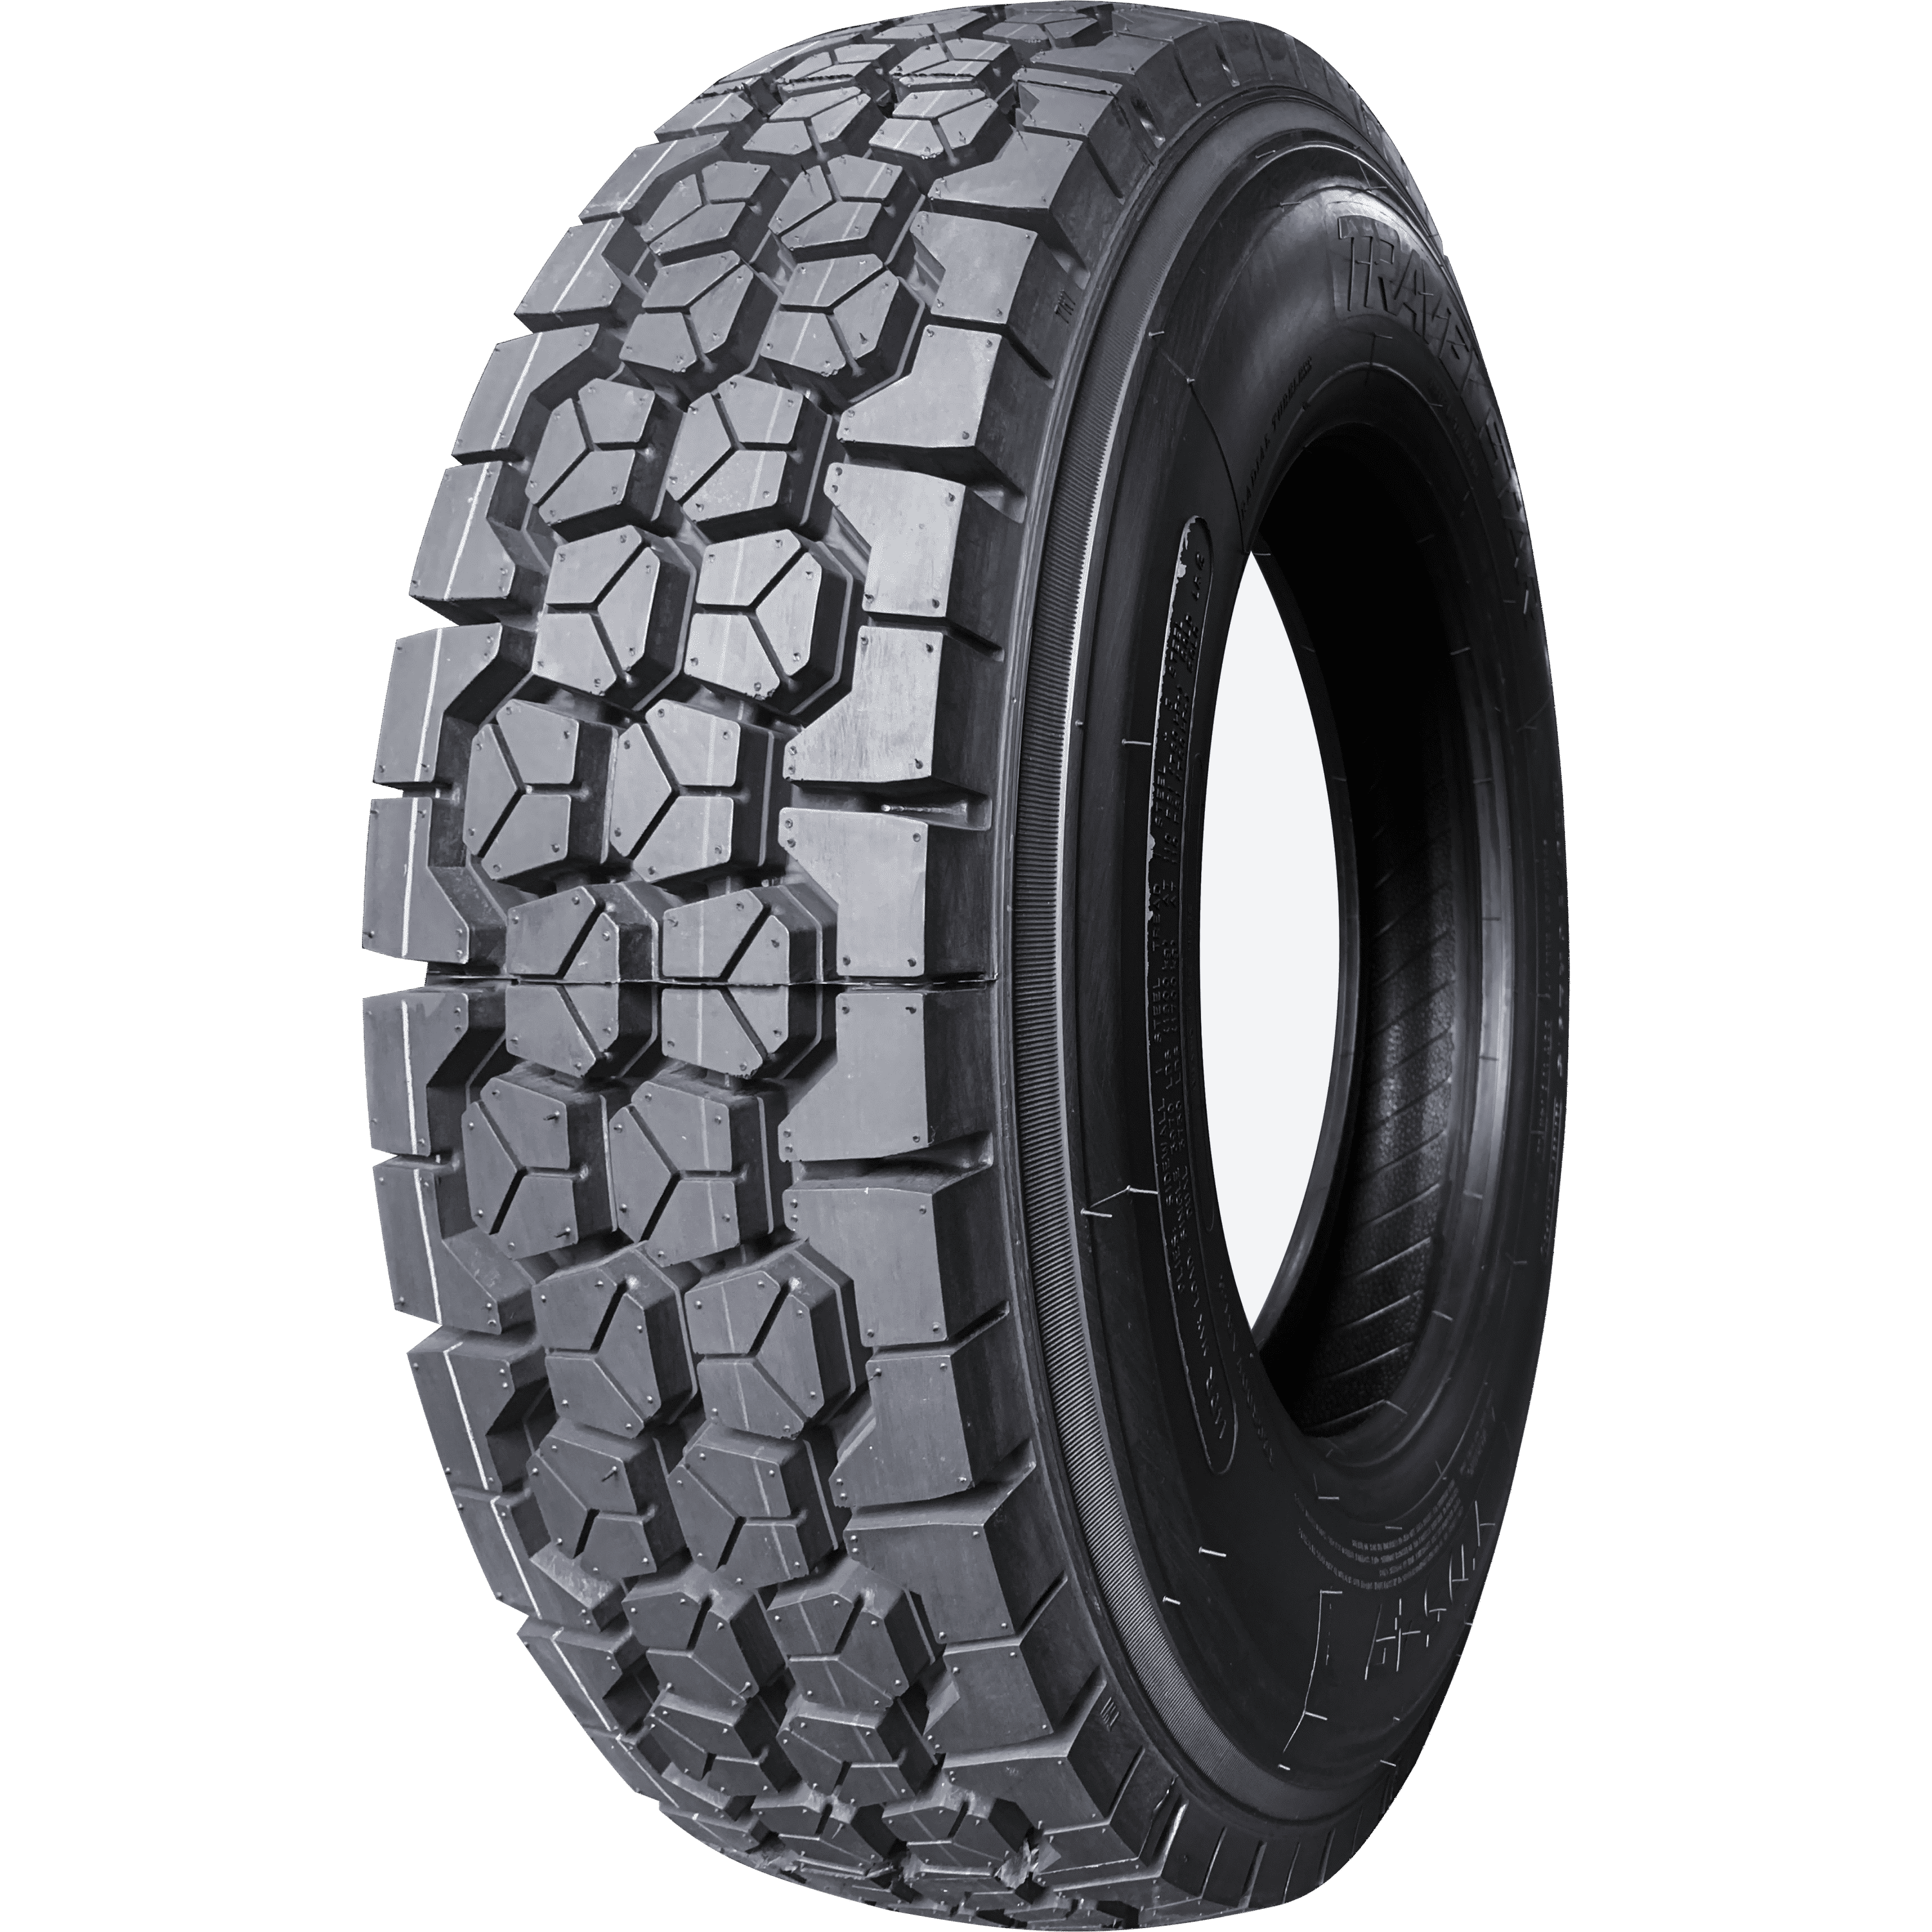 Travelstar TD547 Drive Commercial Radial Truck Tire - 225/70R19.5 14 Can I Replace 245 Tires With 225